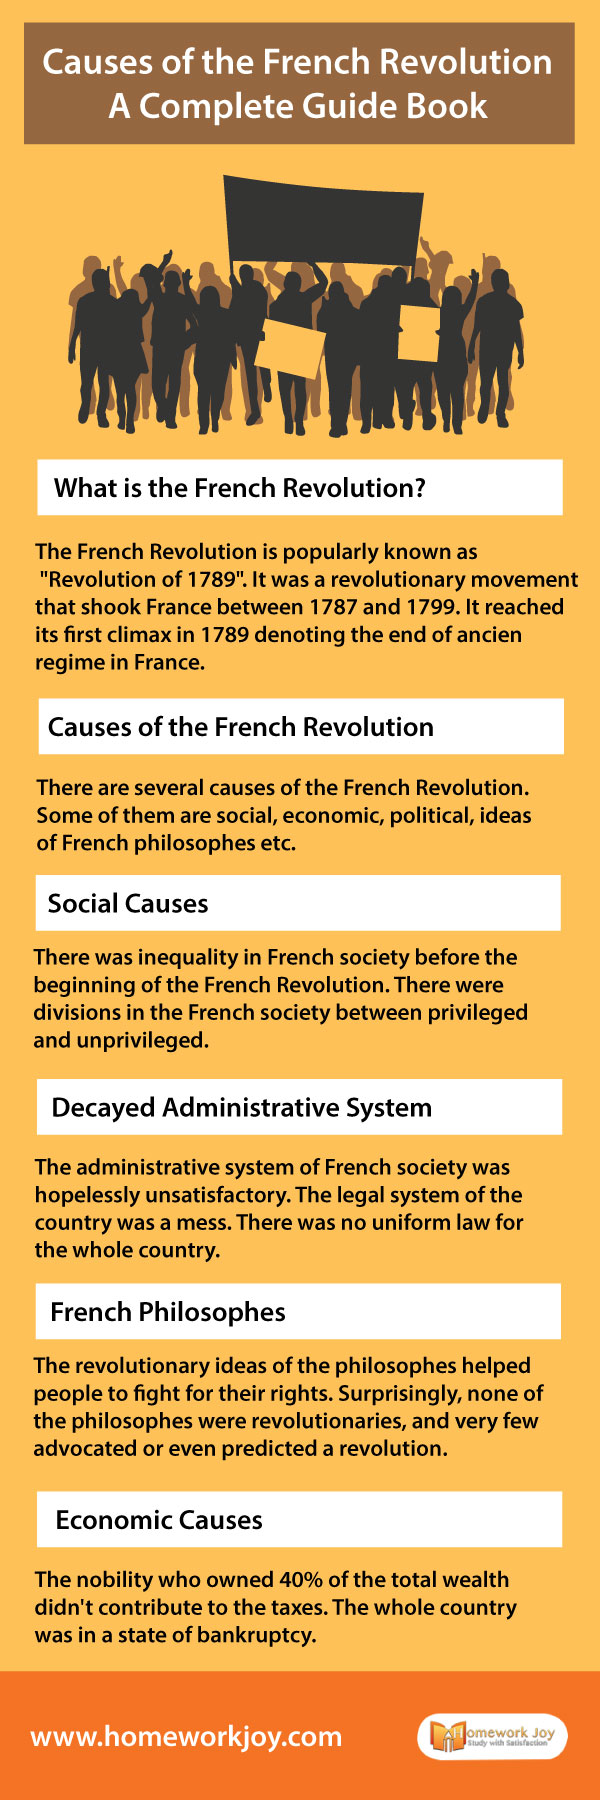 Causes-of-the-French-Revolution